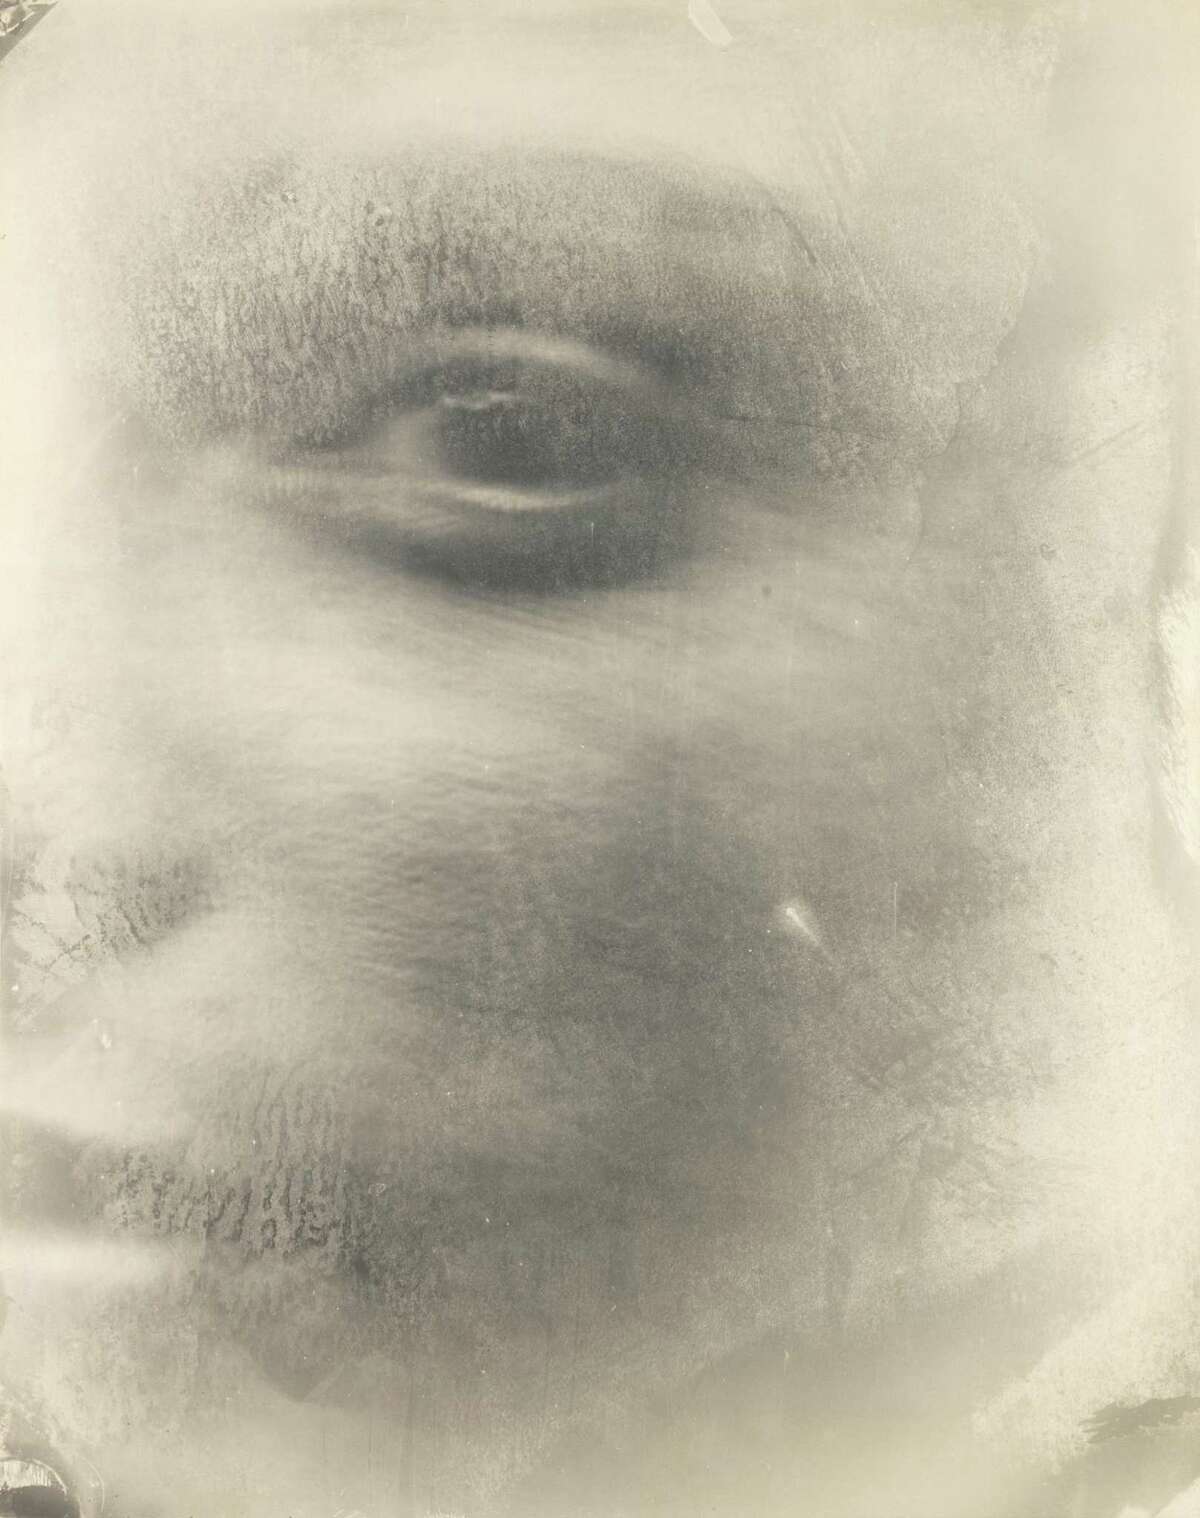 "Virginia #6" is among photographs on view in "Sally Mann: A Thousand Crossings," up March 3-May 27 at the Museum of Fine Arts, Houston.